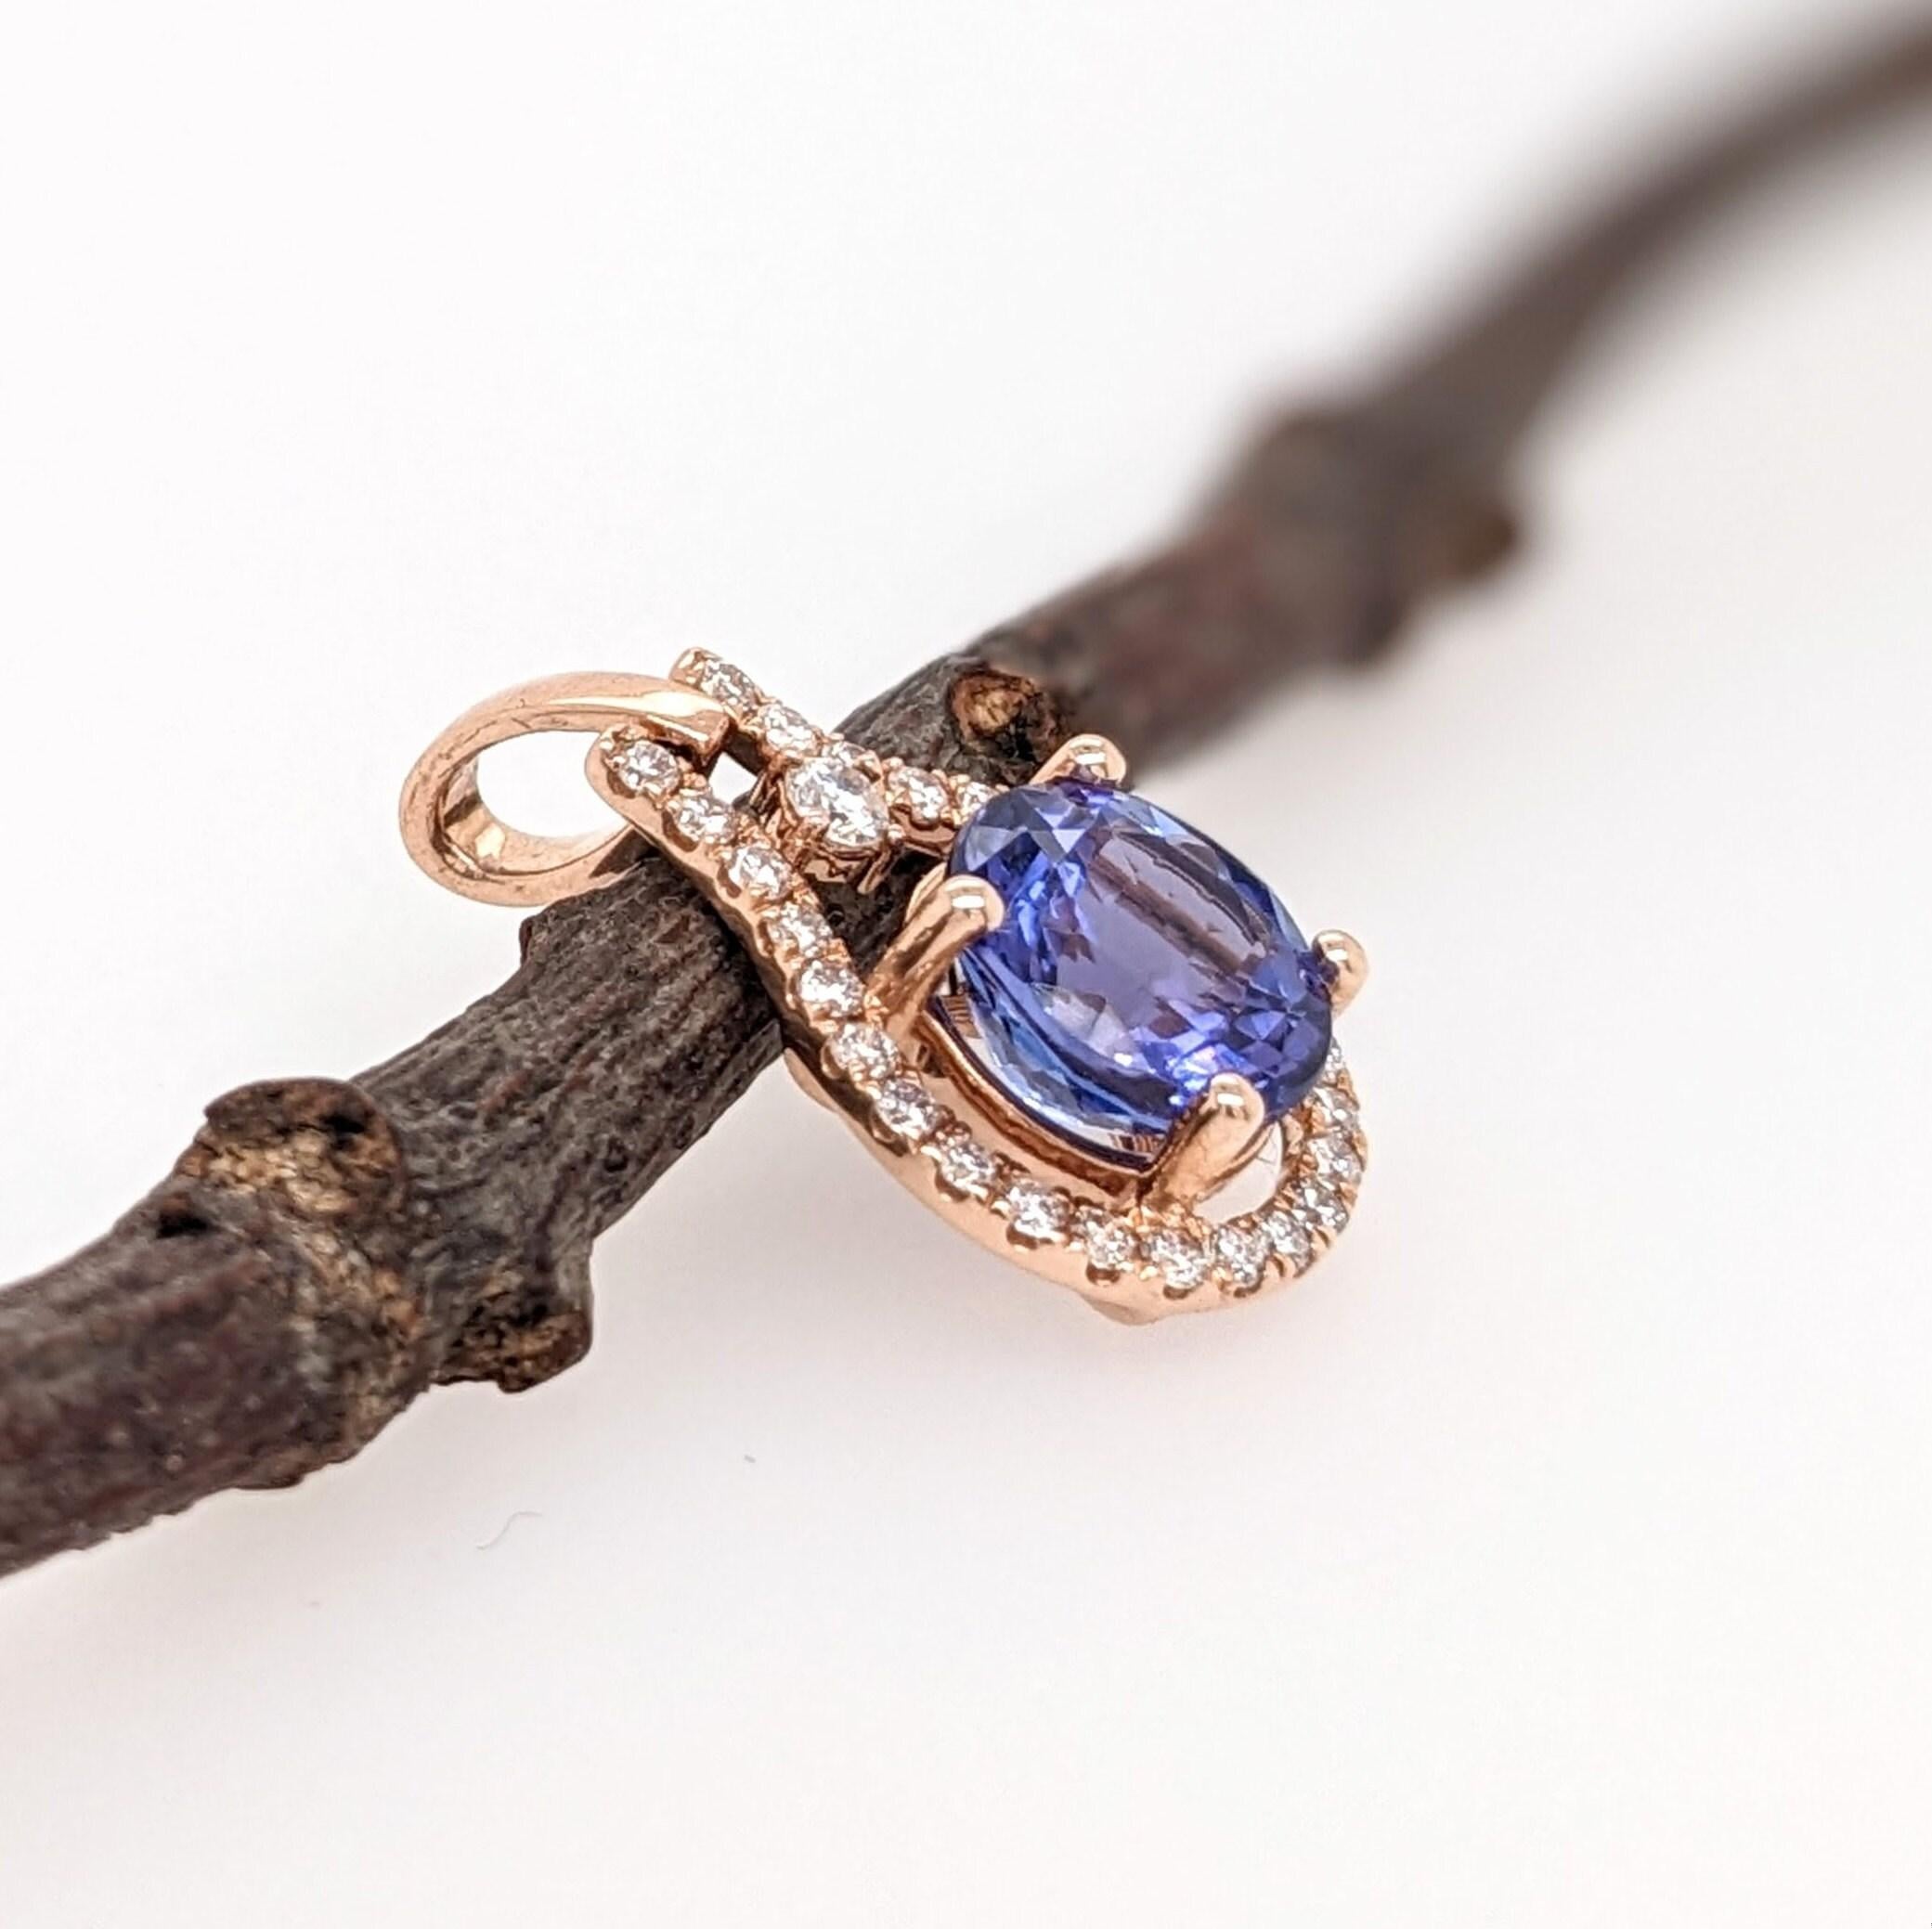 1.6ct Tanzanite Pendant w Earth Mined Diamonds in Solid 14K Rose Gold Round 8mm 2